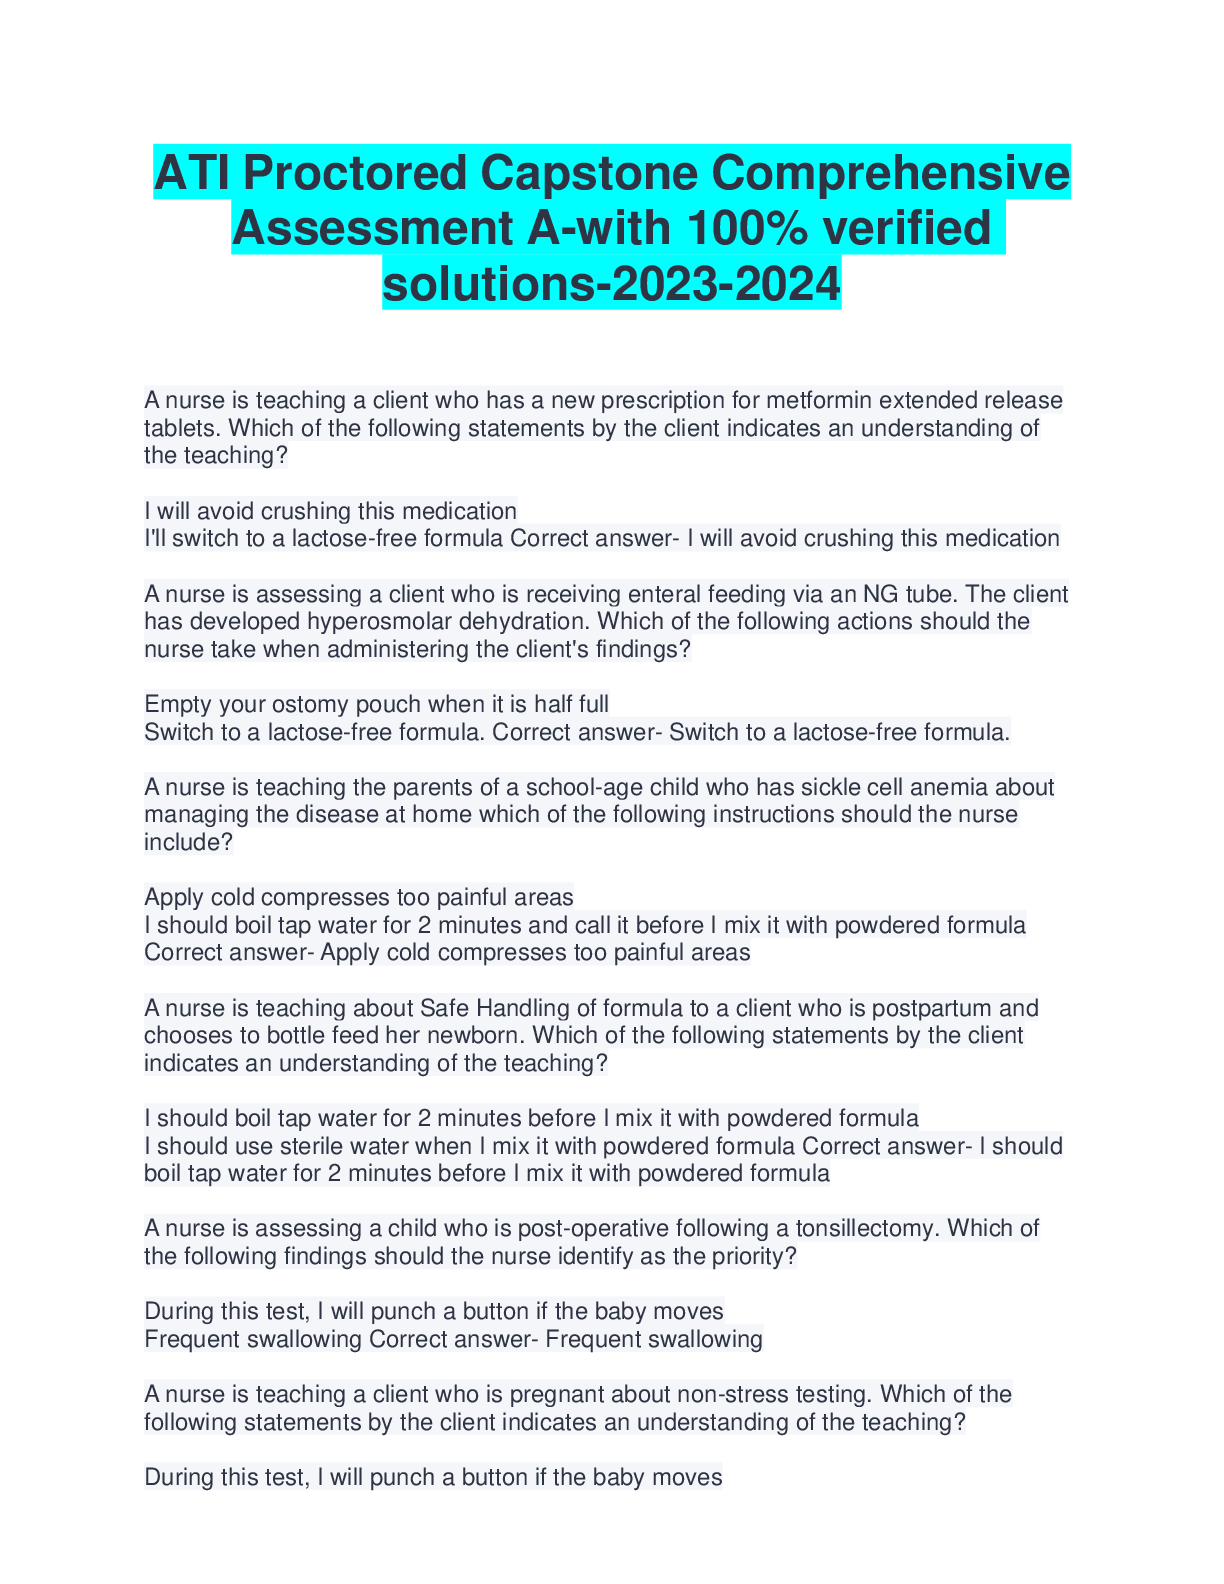 ATI Proctored Capstone Comprehensive Assessment Awith 100 verified